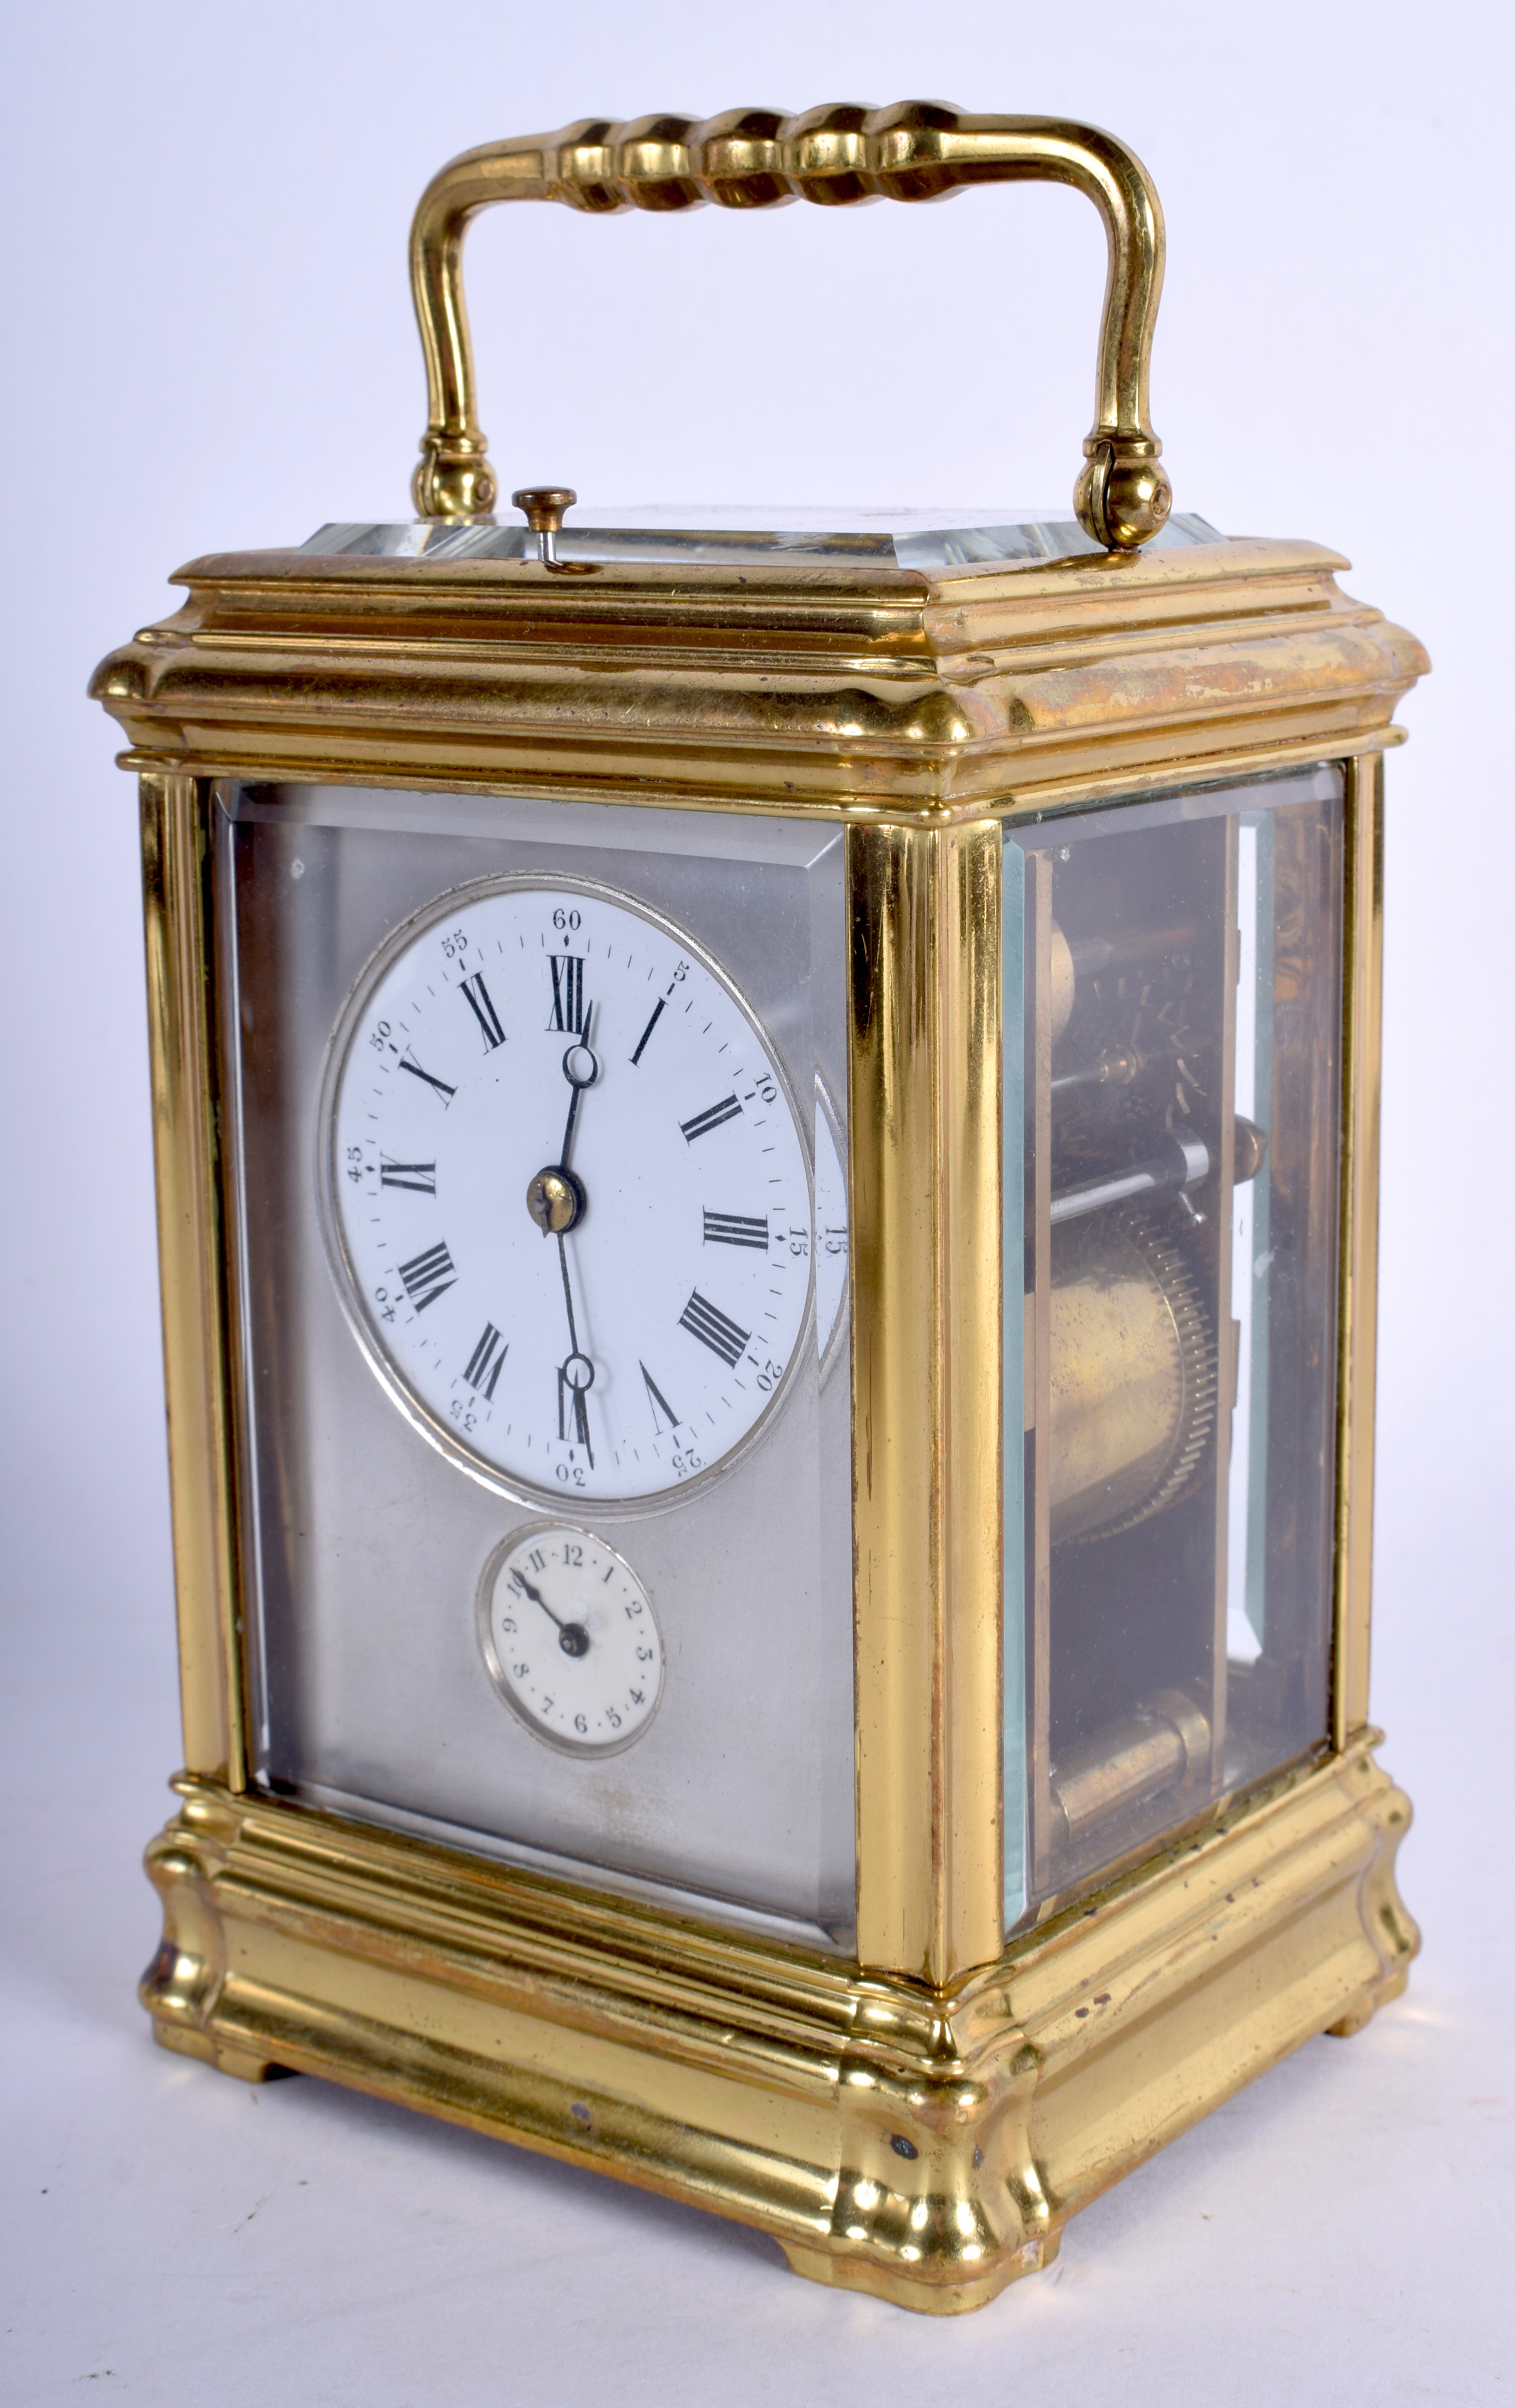 A GOOD ANTIQUE FRENCH GRAND SONNERIE CARRIAGE CLOCK. 19 cm high inc handle.